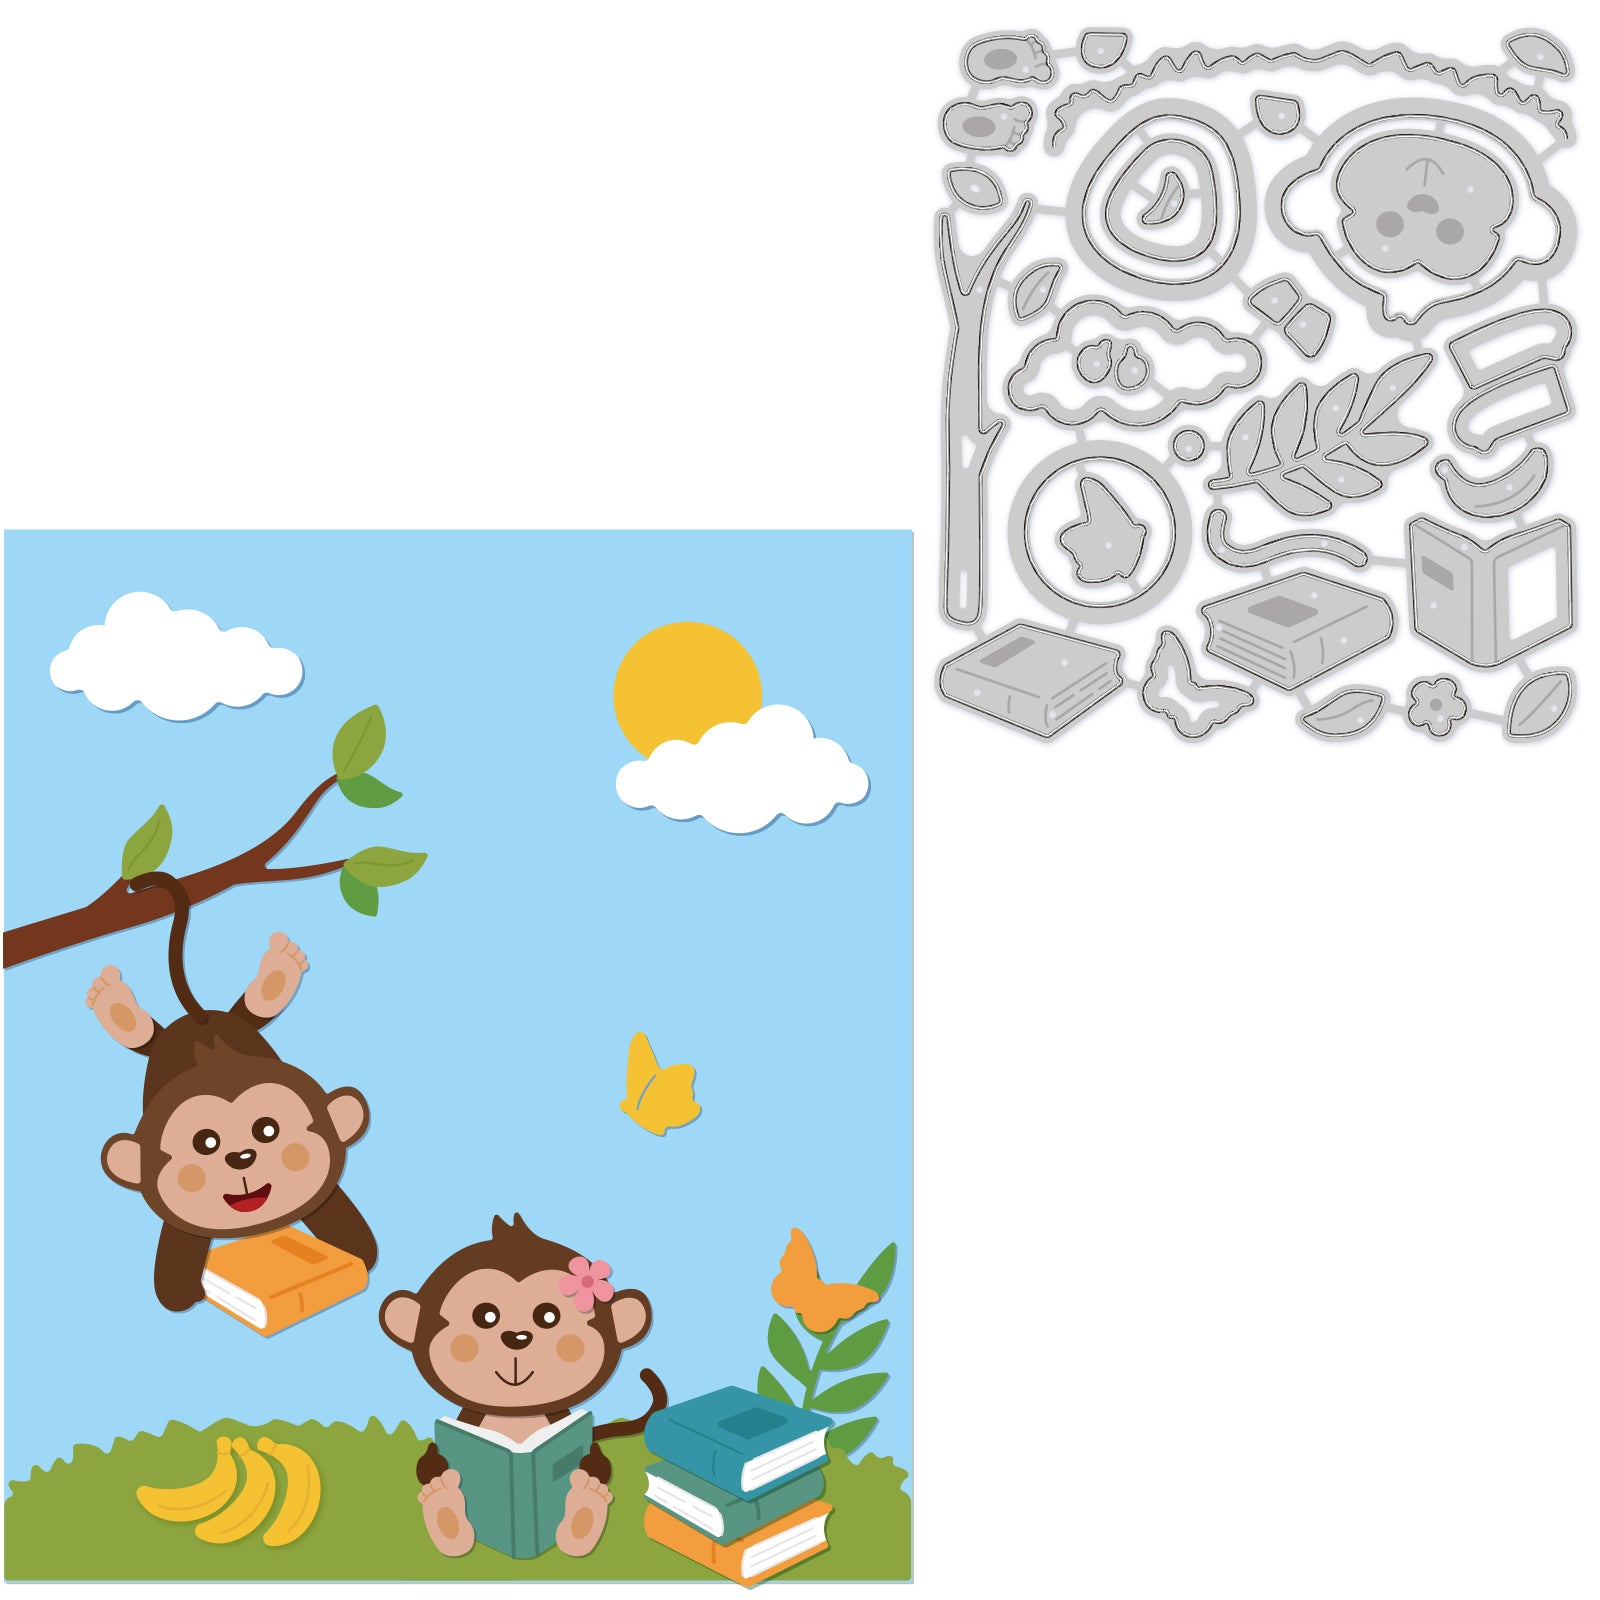 Globleland Reading Monkey, Reading, Books, Bananas, Nature, Grass, Clouds, Butterflies, Climbing Trees Carbon Steel Cutting Dies Stencils, for DIY Scrapbooking/Photo Album, Decorative Embossing DIY Paper Card